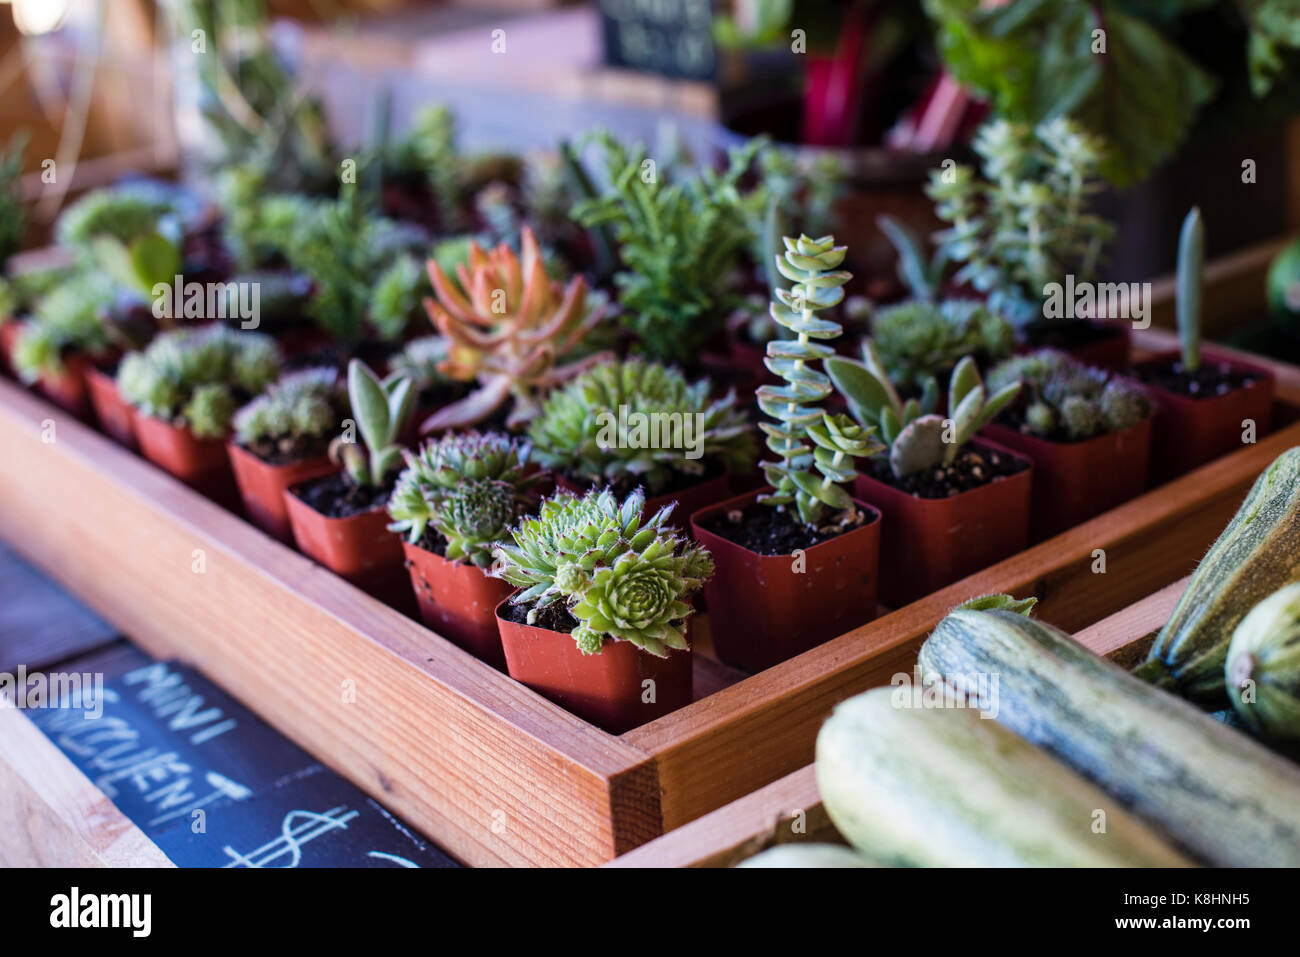 Close-up of potted plants for sale in market Stock Photo